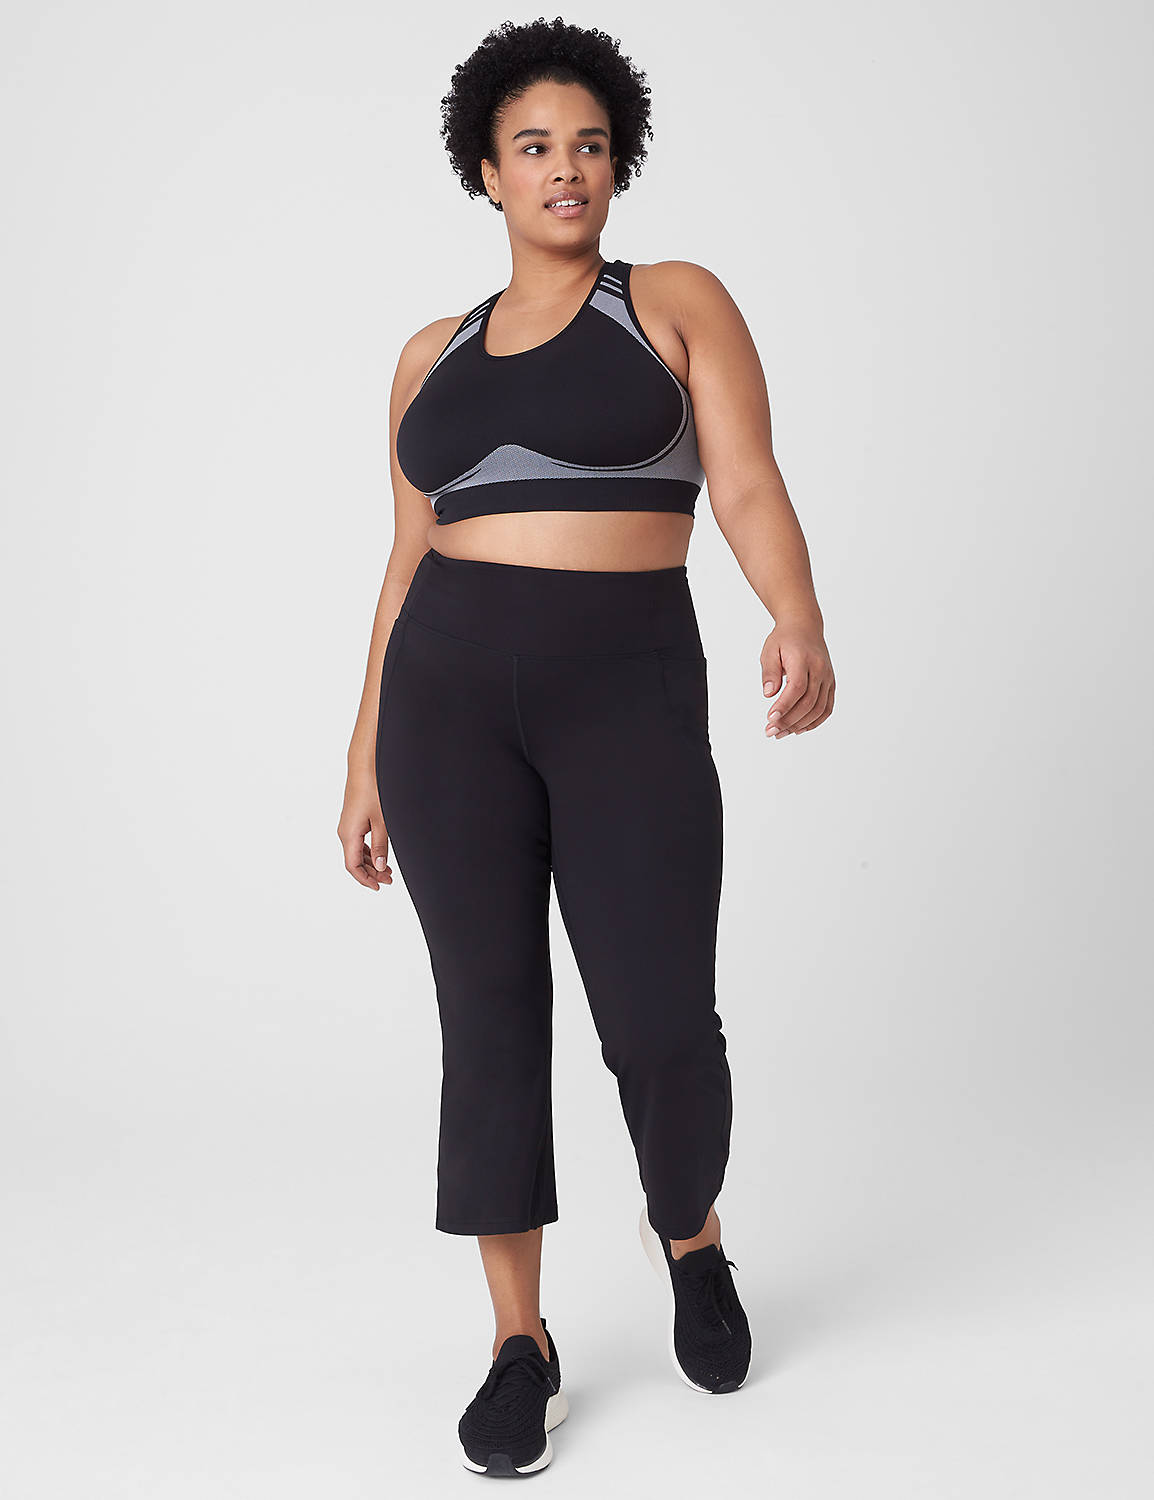 Low Impact OPP Zoned Seamless Contrast Sport Bra 1123273-T-1123517-S:Ascena Black:26/28 Product Image 3